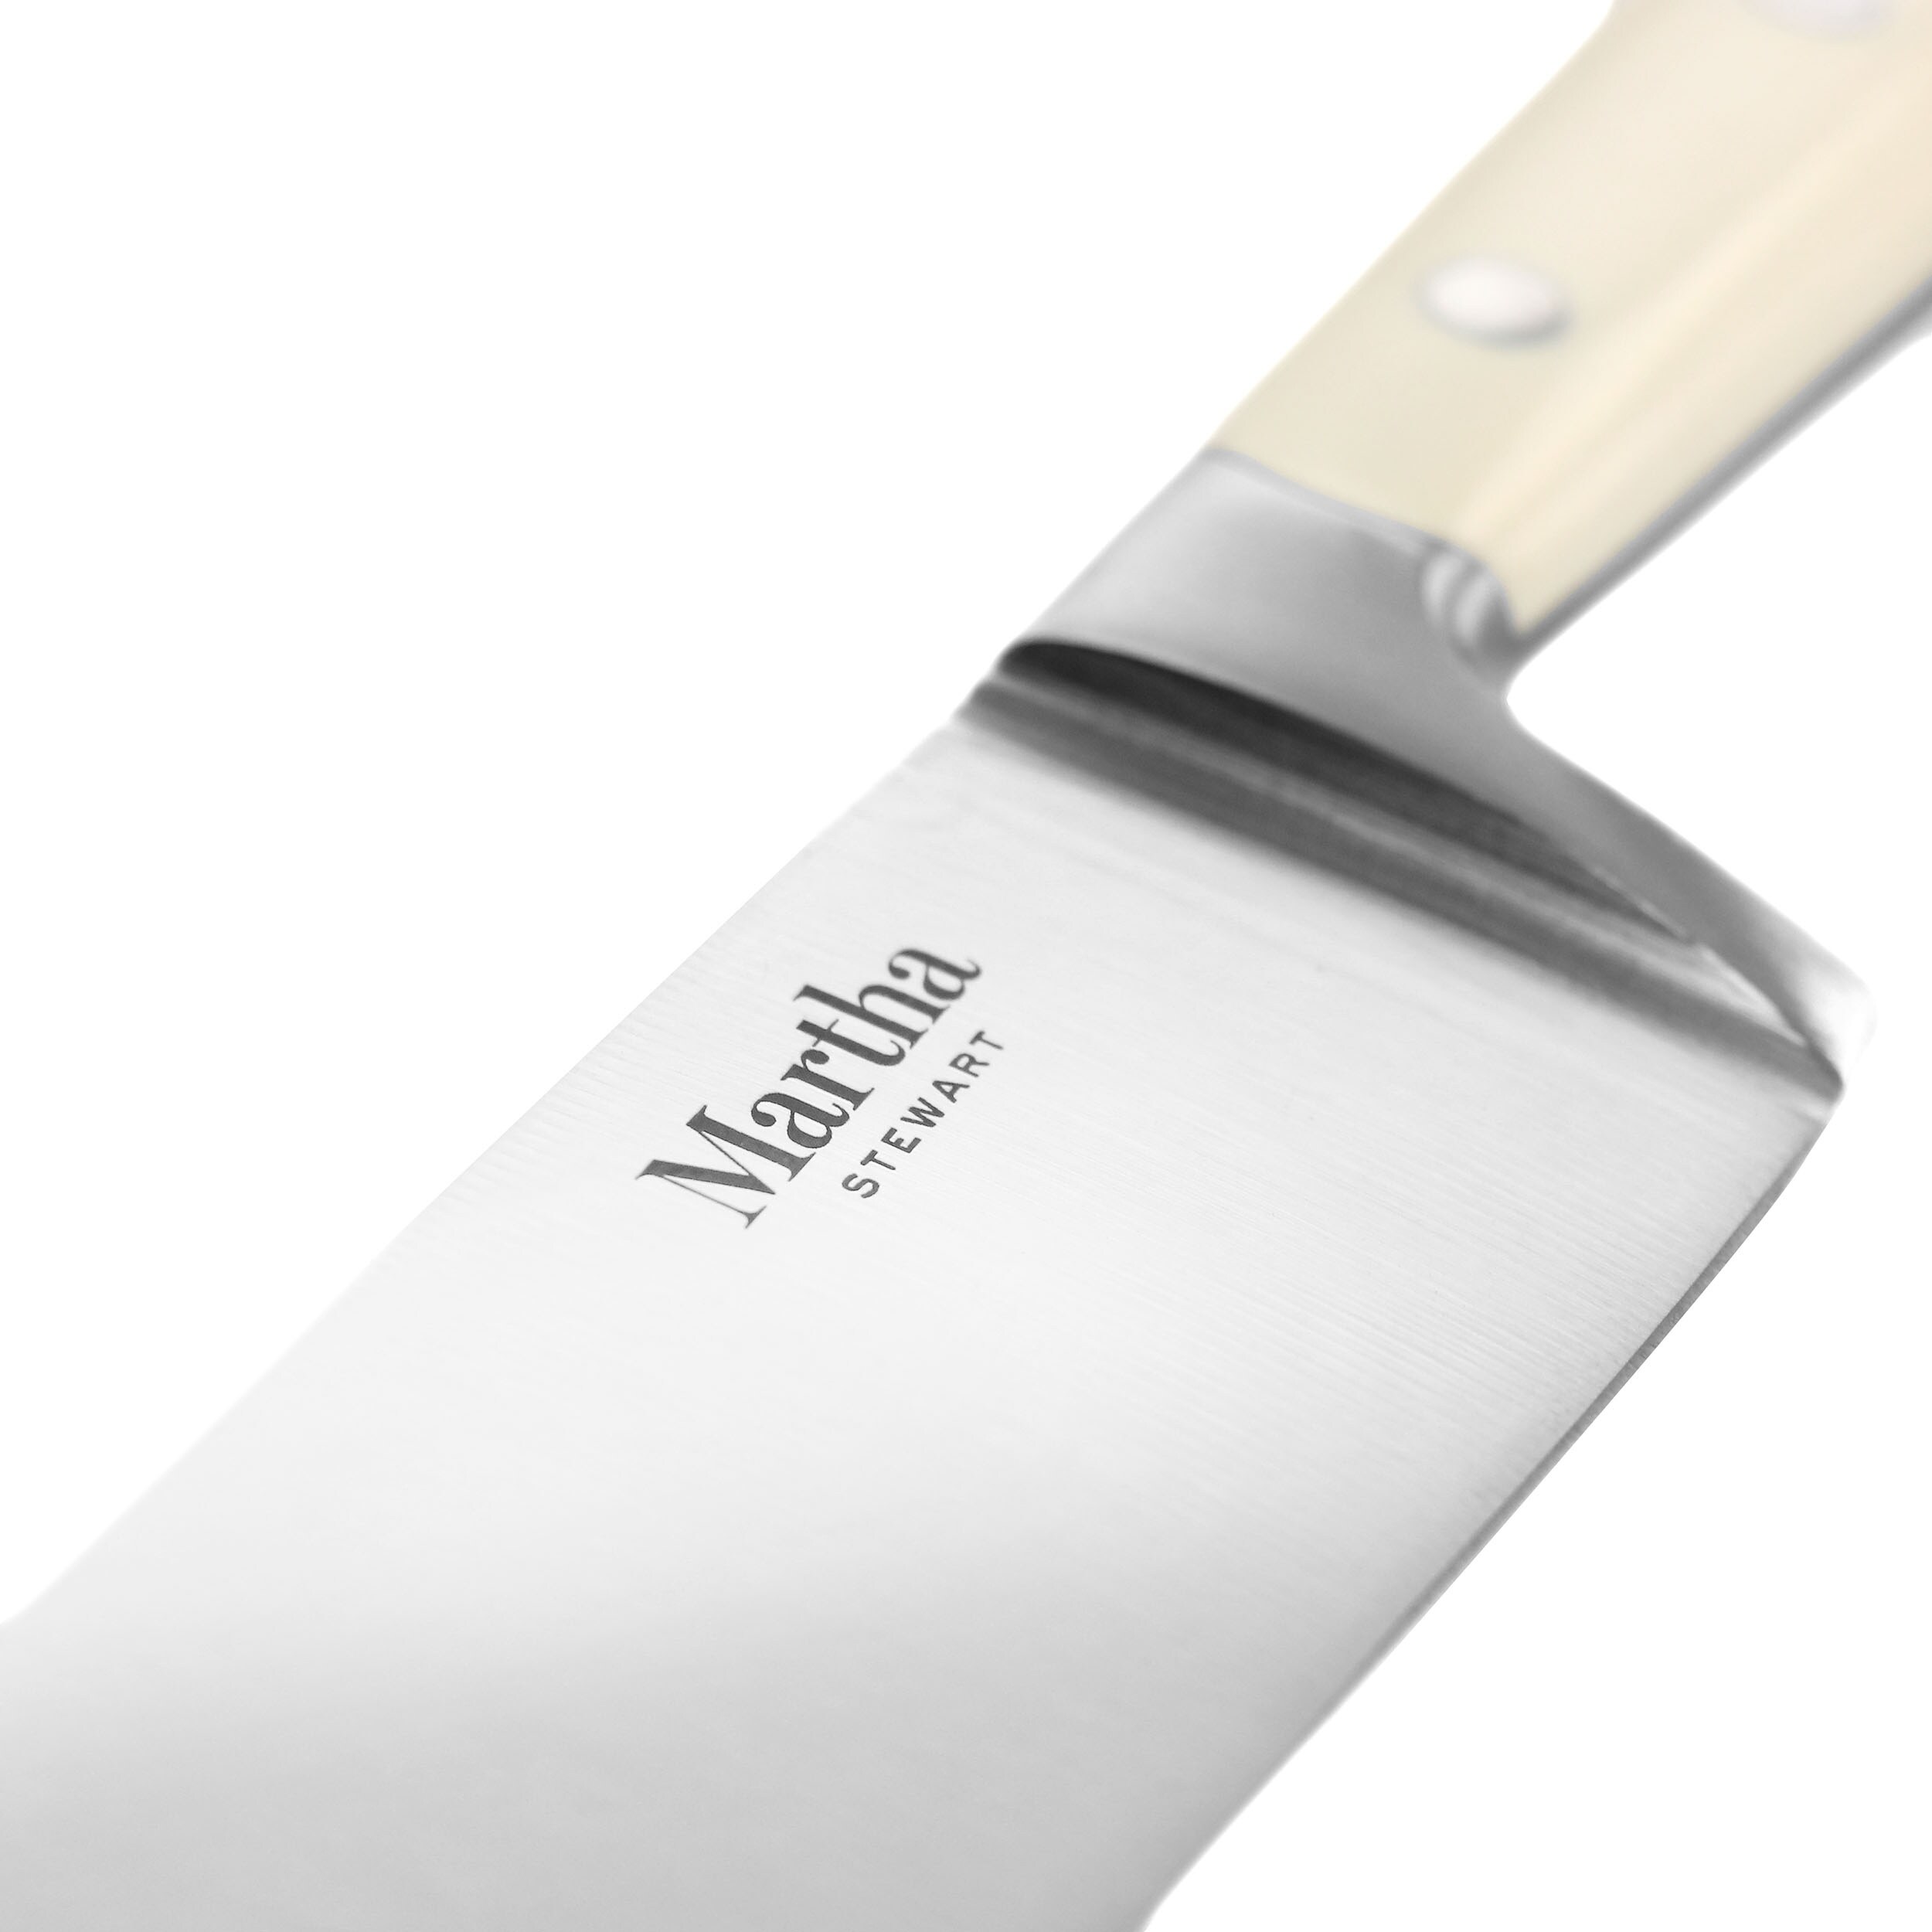 Martha Stewart Collection Full Tang 8 Blade Chef's Knife